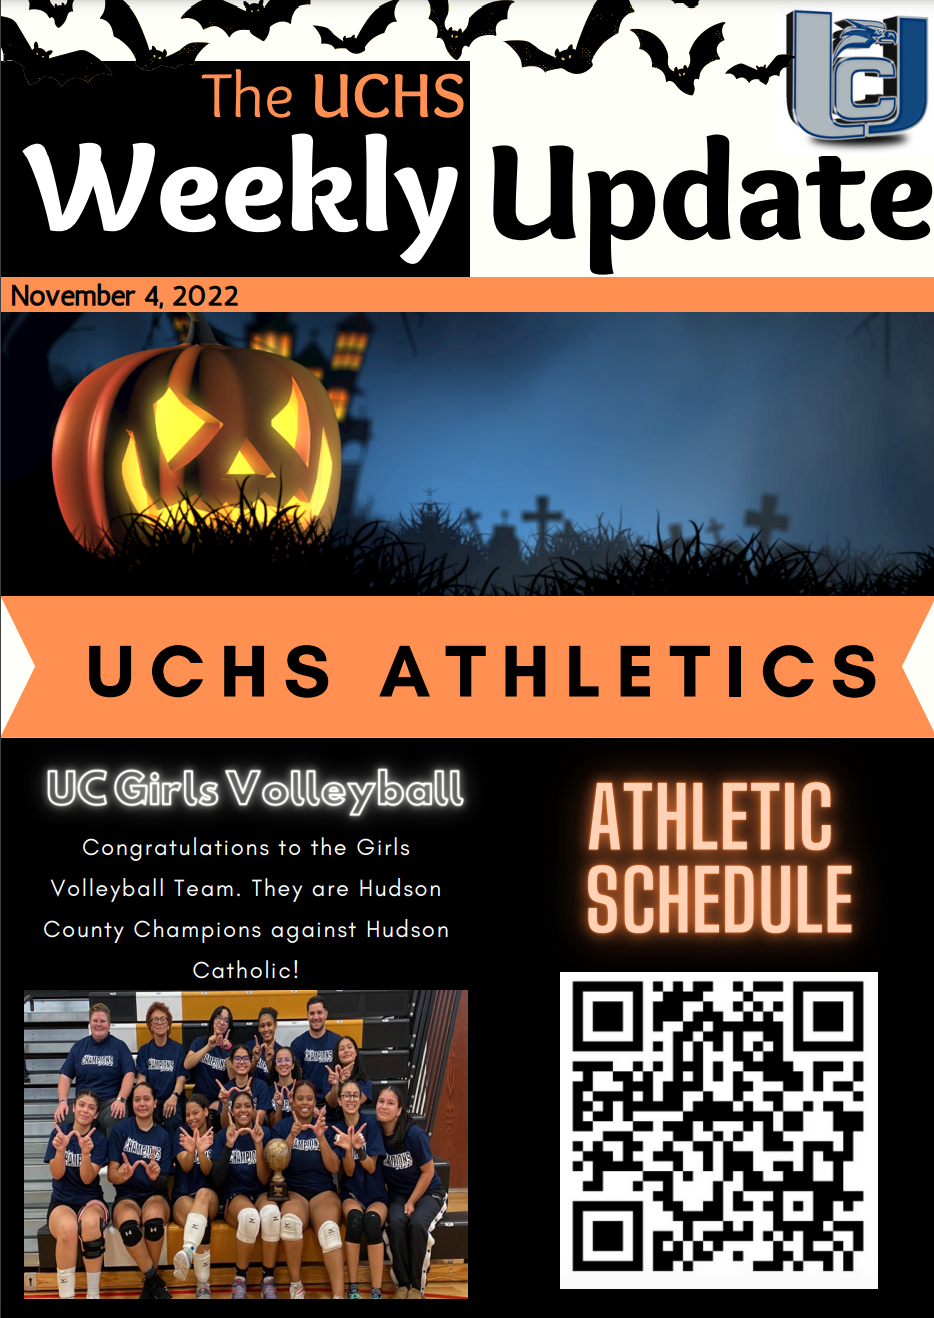 The UCHS Weekly Update-November 4, 2022-English-Page 1